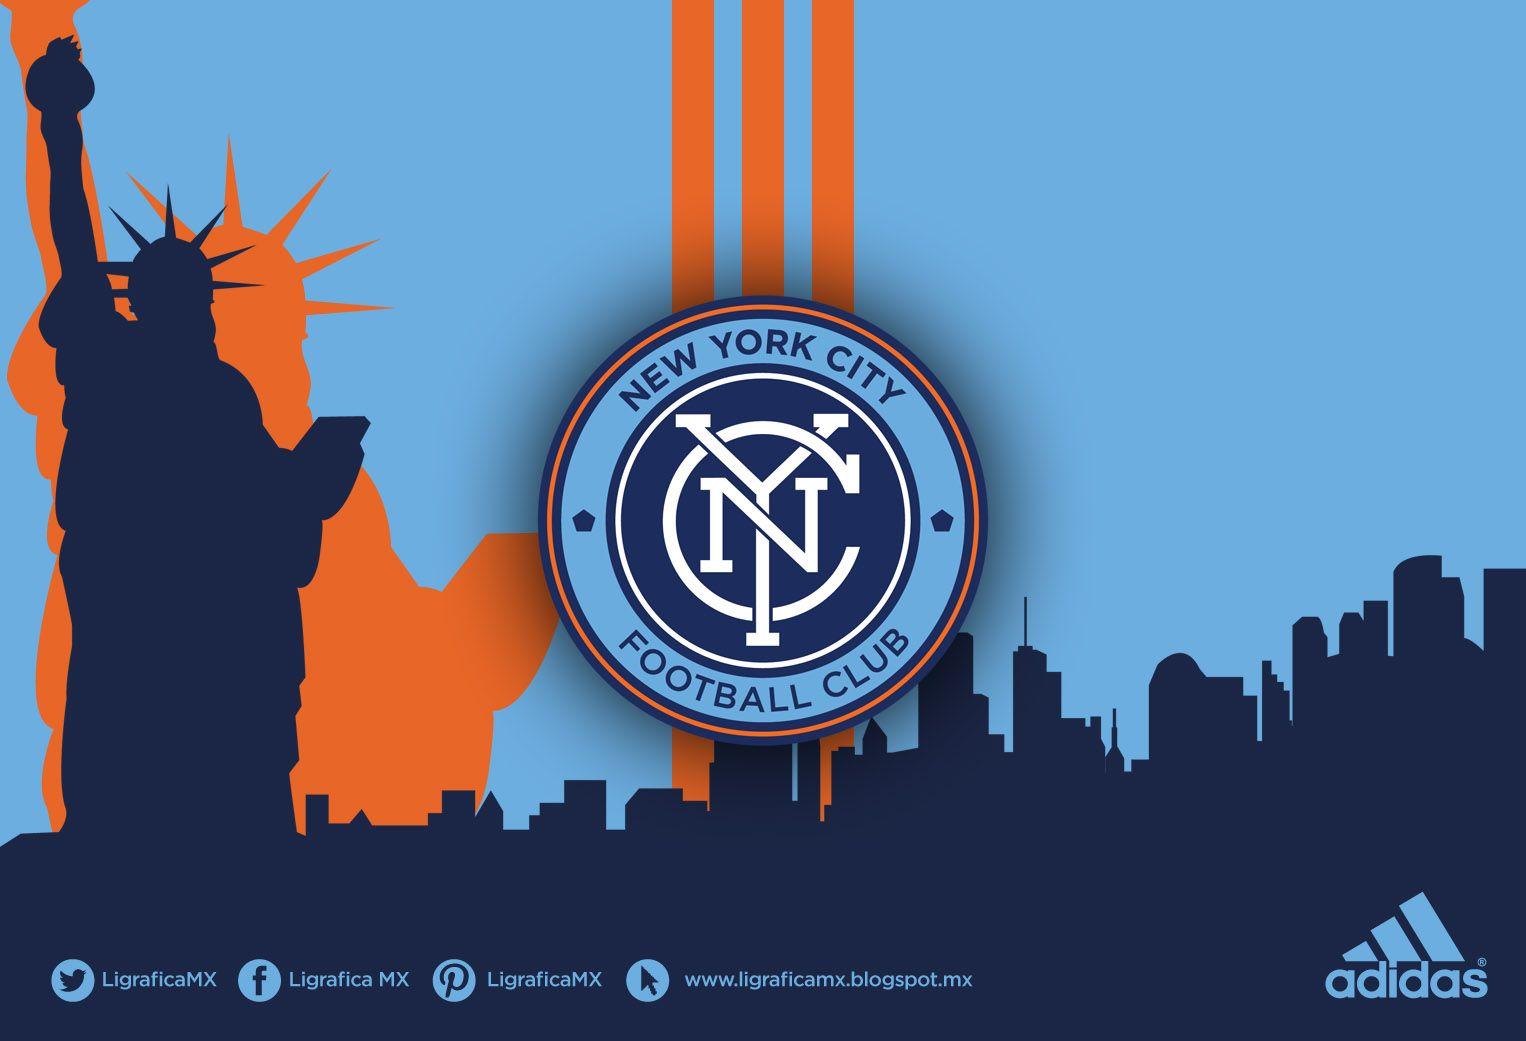 NYCFC #myNYCFC • LigraficaMX 200314CTG League Soccer. This